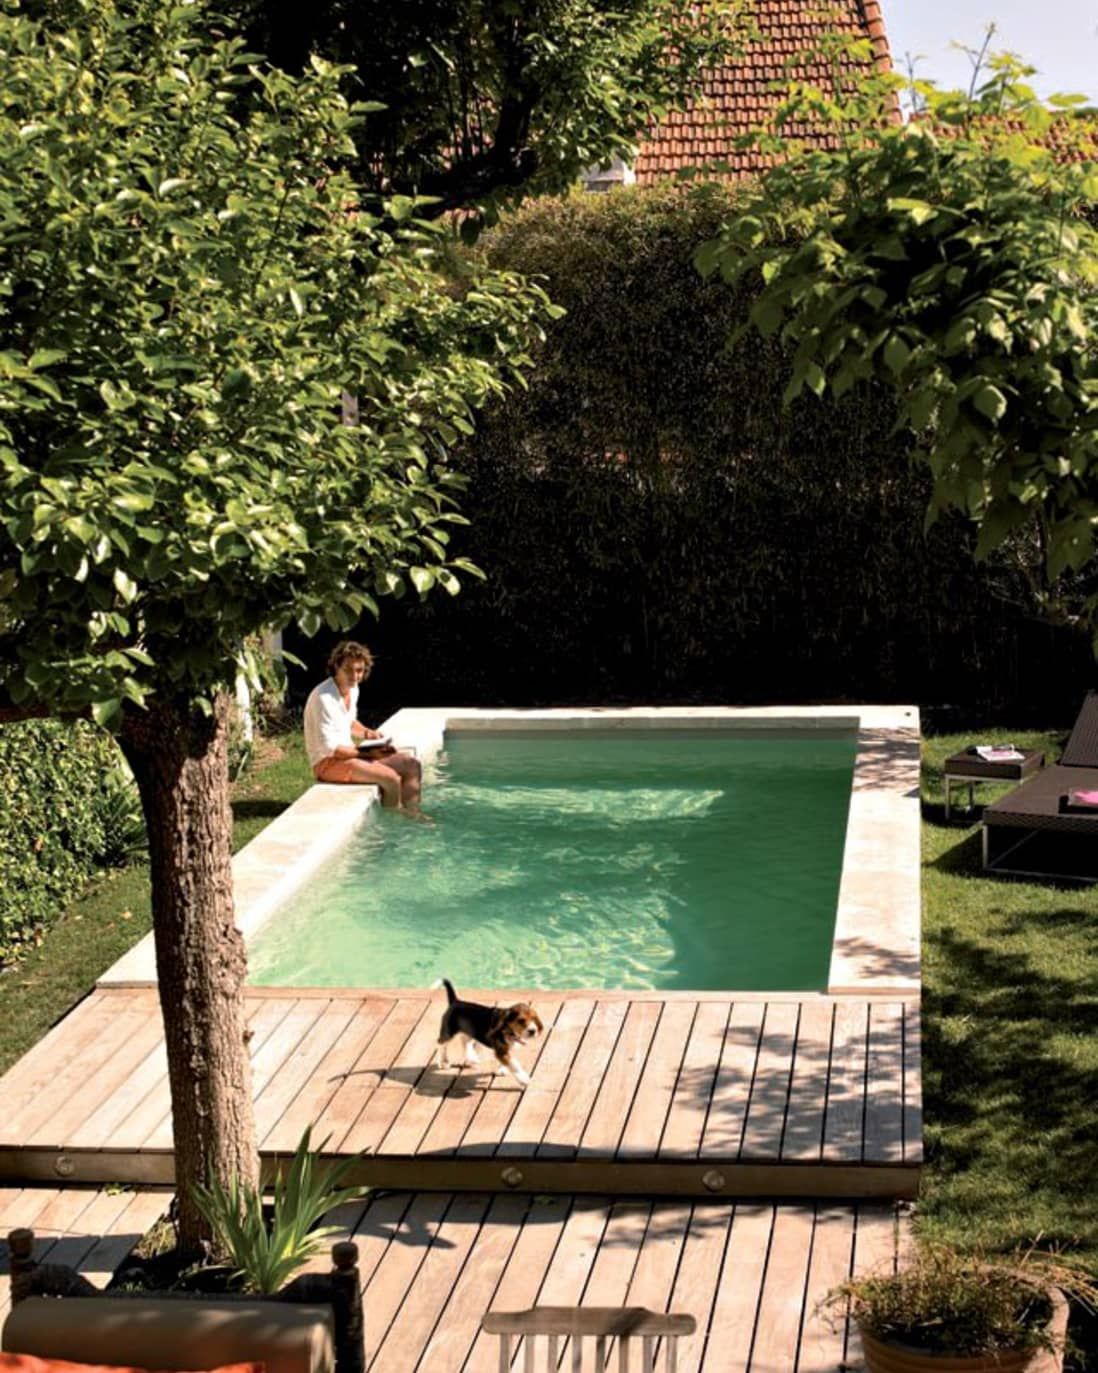 Pretty And Cool Small Pool Designs